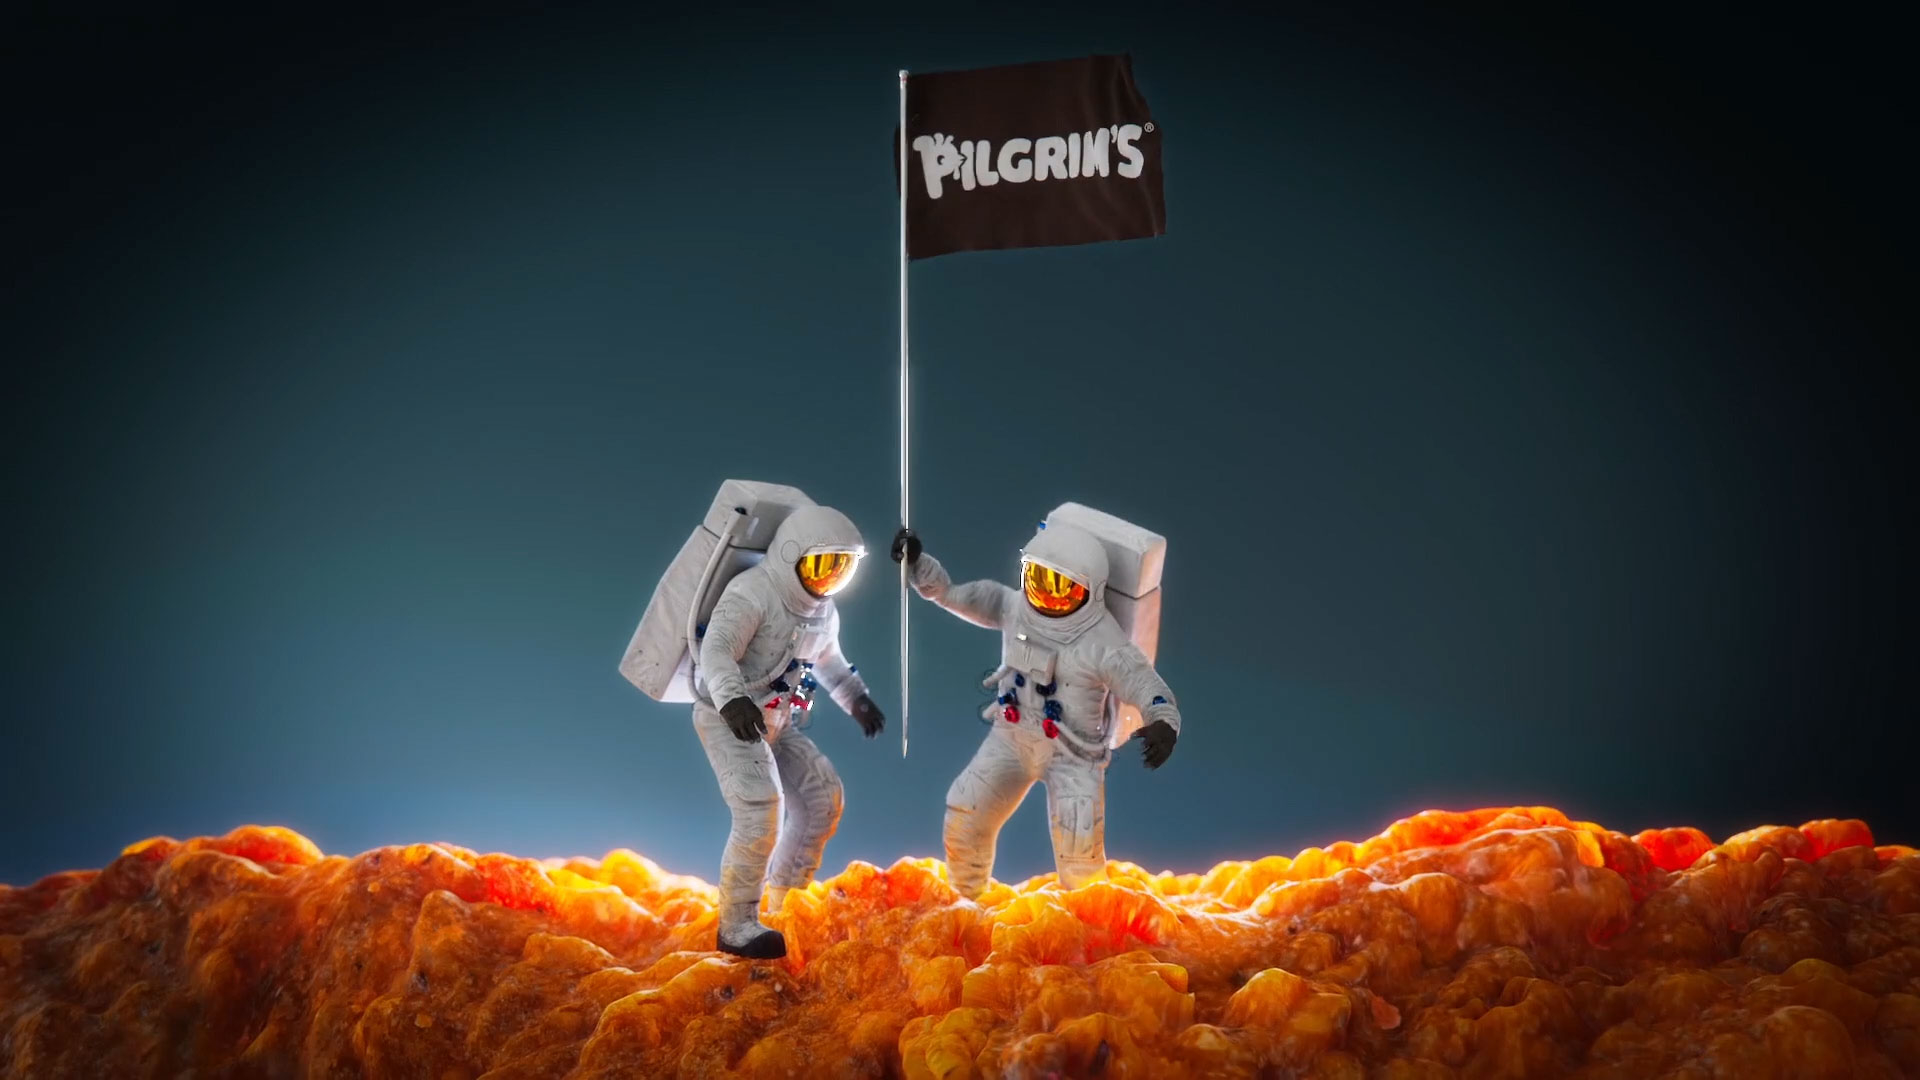 As part of the brand’s pursuit to rule the roost, Pilgrim’s is flying the coop of traditional chicken advertising with the brand’s first-ever original song, “Put It In A Nugget," spotlighting Pilgrim’s new innovative, taste-forward products.